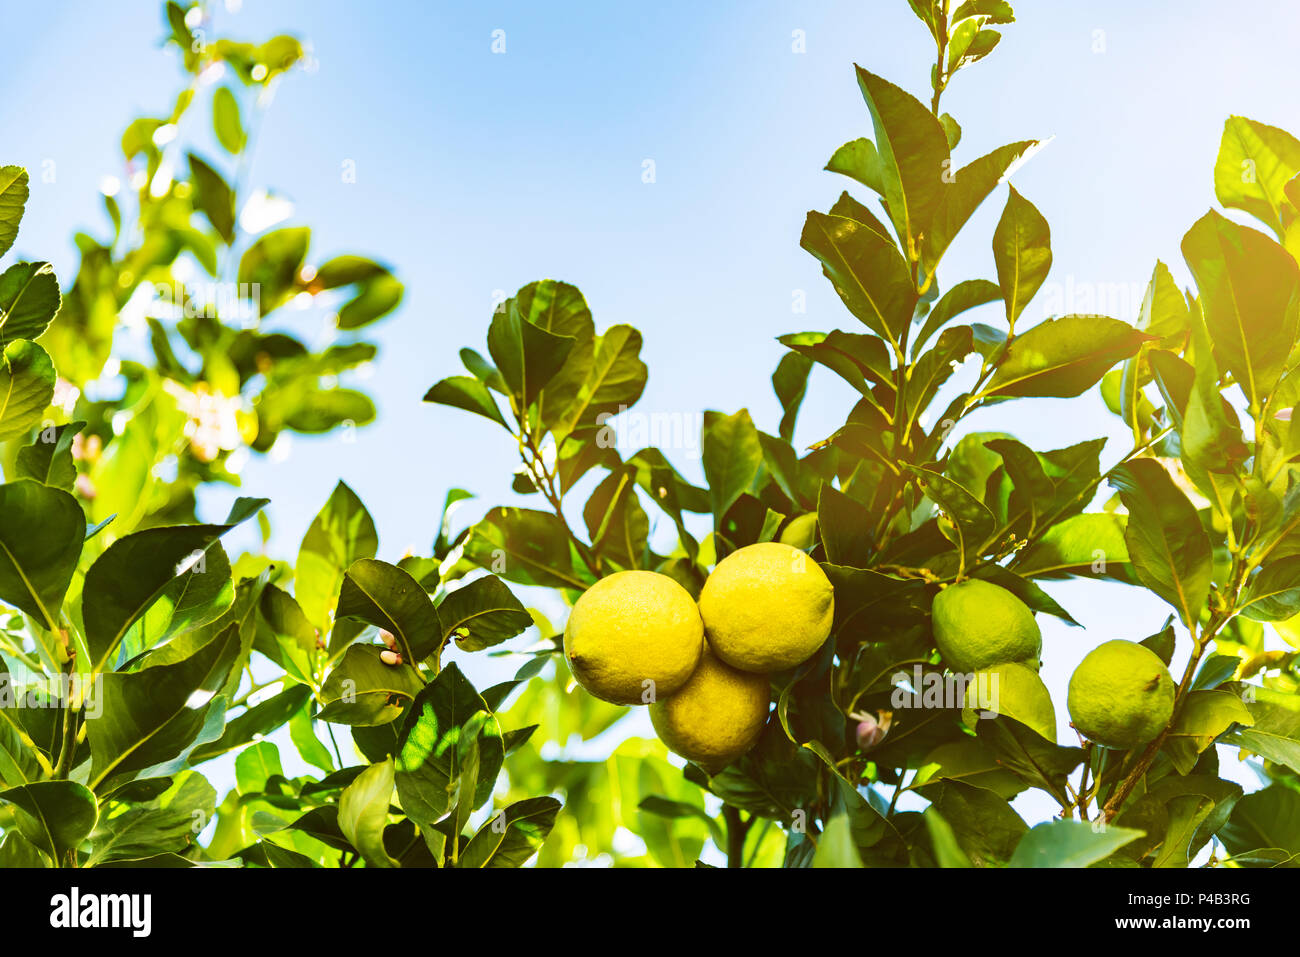 close-up of ripe yellow and unripe green lemons on tree against blue sky Stock Photo